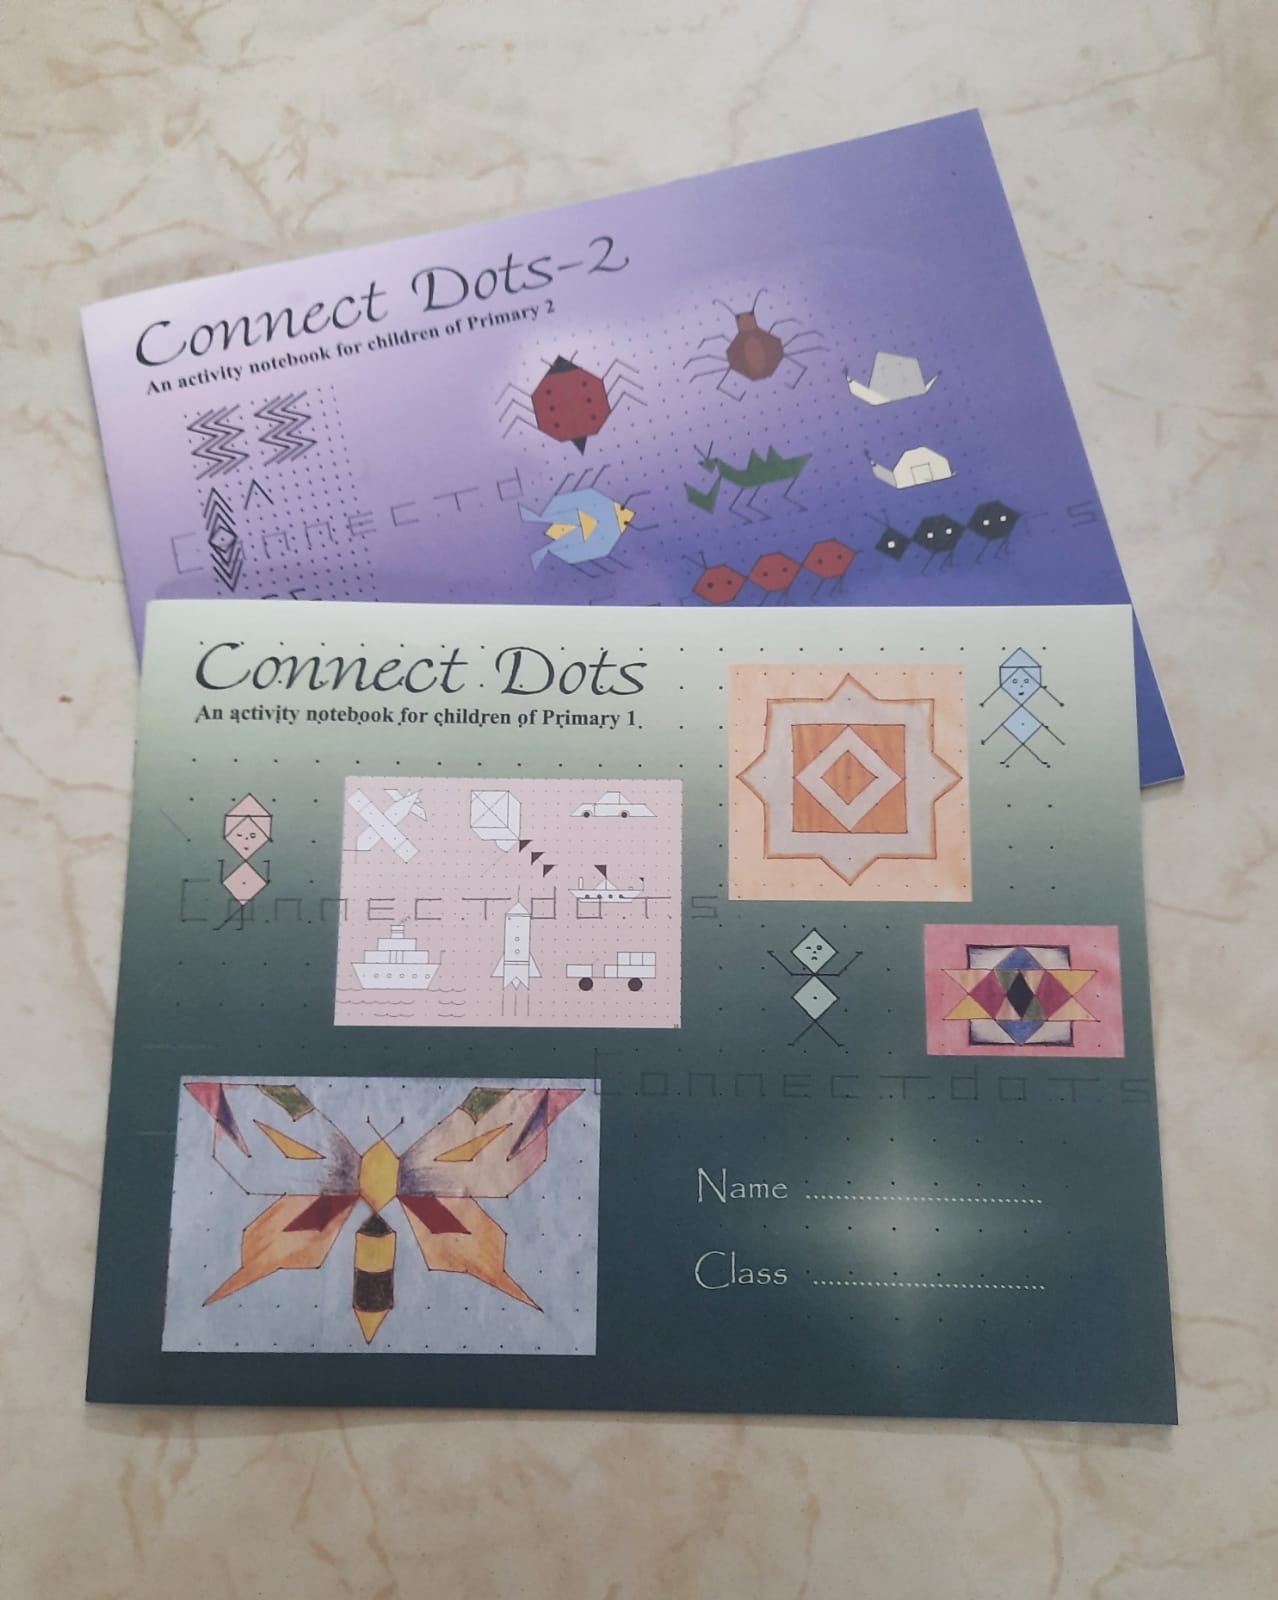 Connect Dots - An activity notebook for children of Primary 2